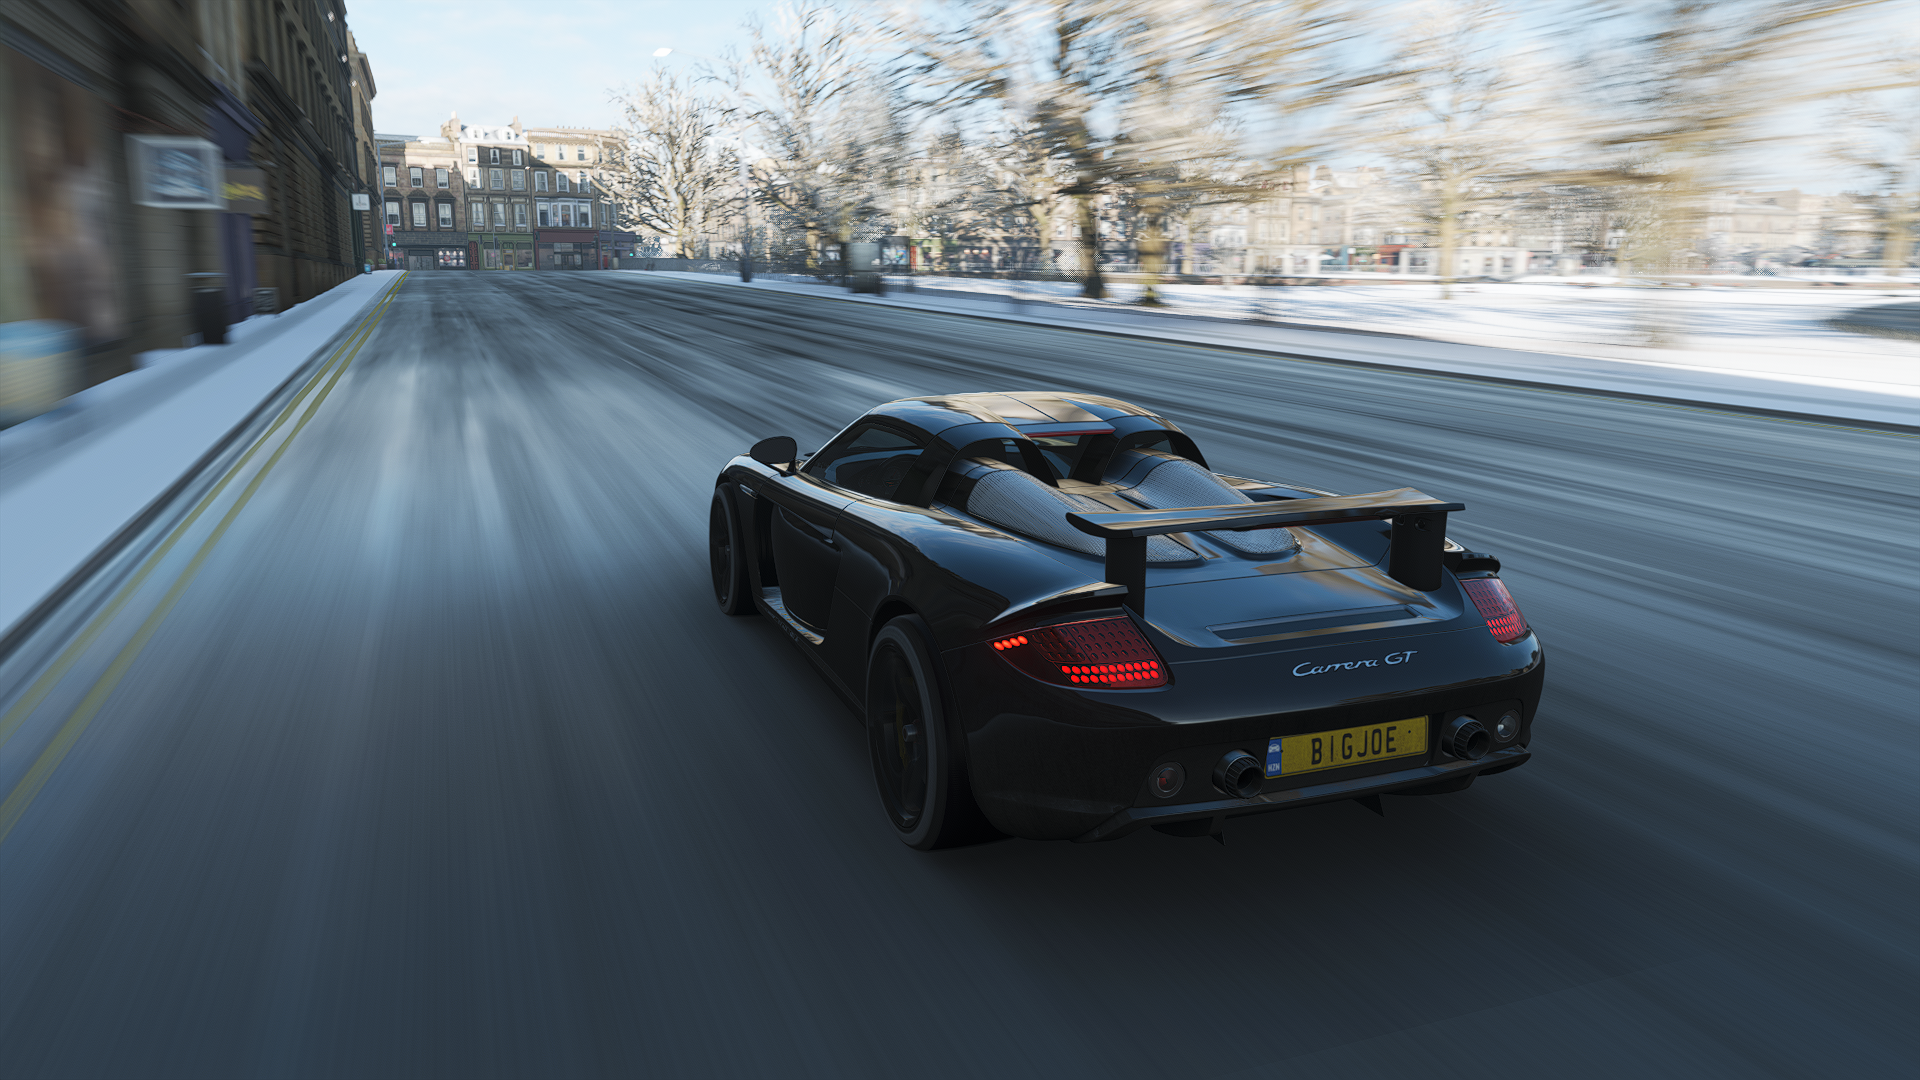 General 1920x1080 Forza Forza Horizon Forza Horizon 4 racing car CGI Porsche Carrera GT video games road rear view taillights licence plates snow blurred blurry background trees